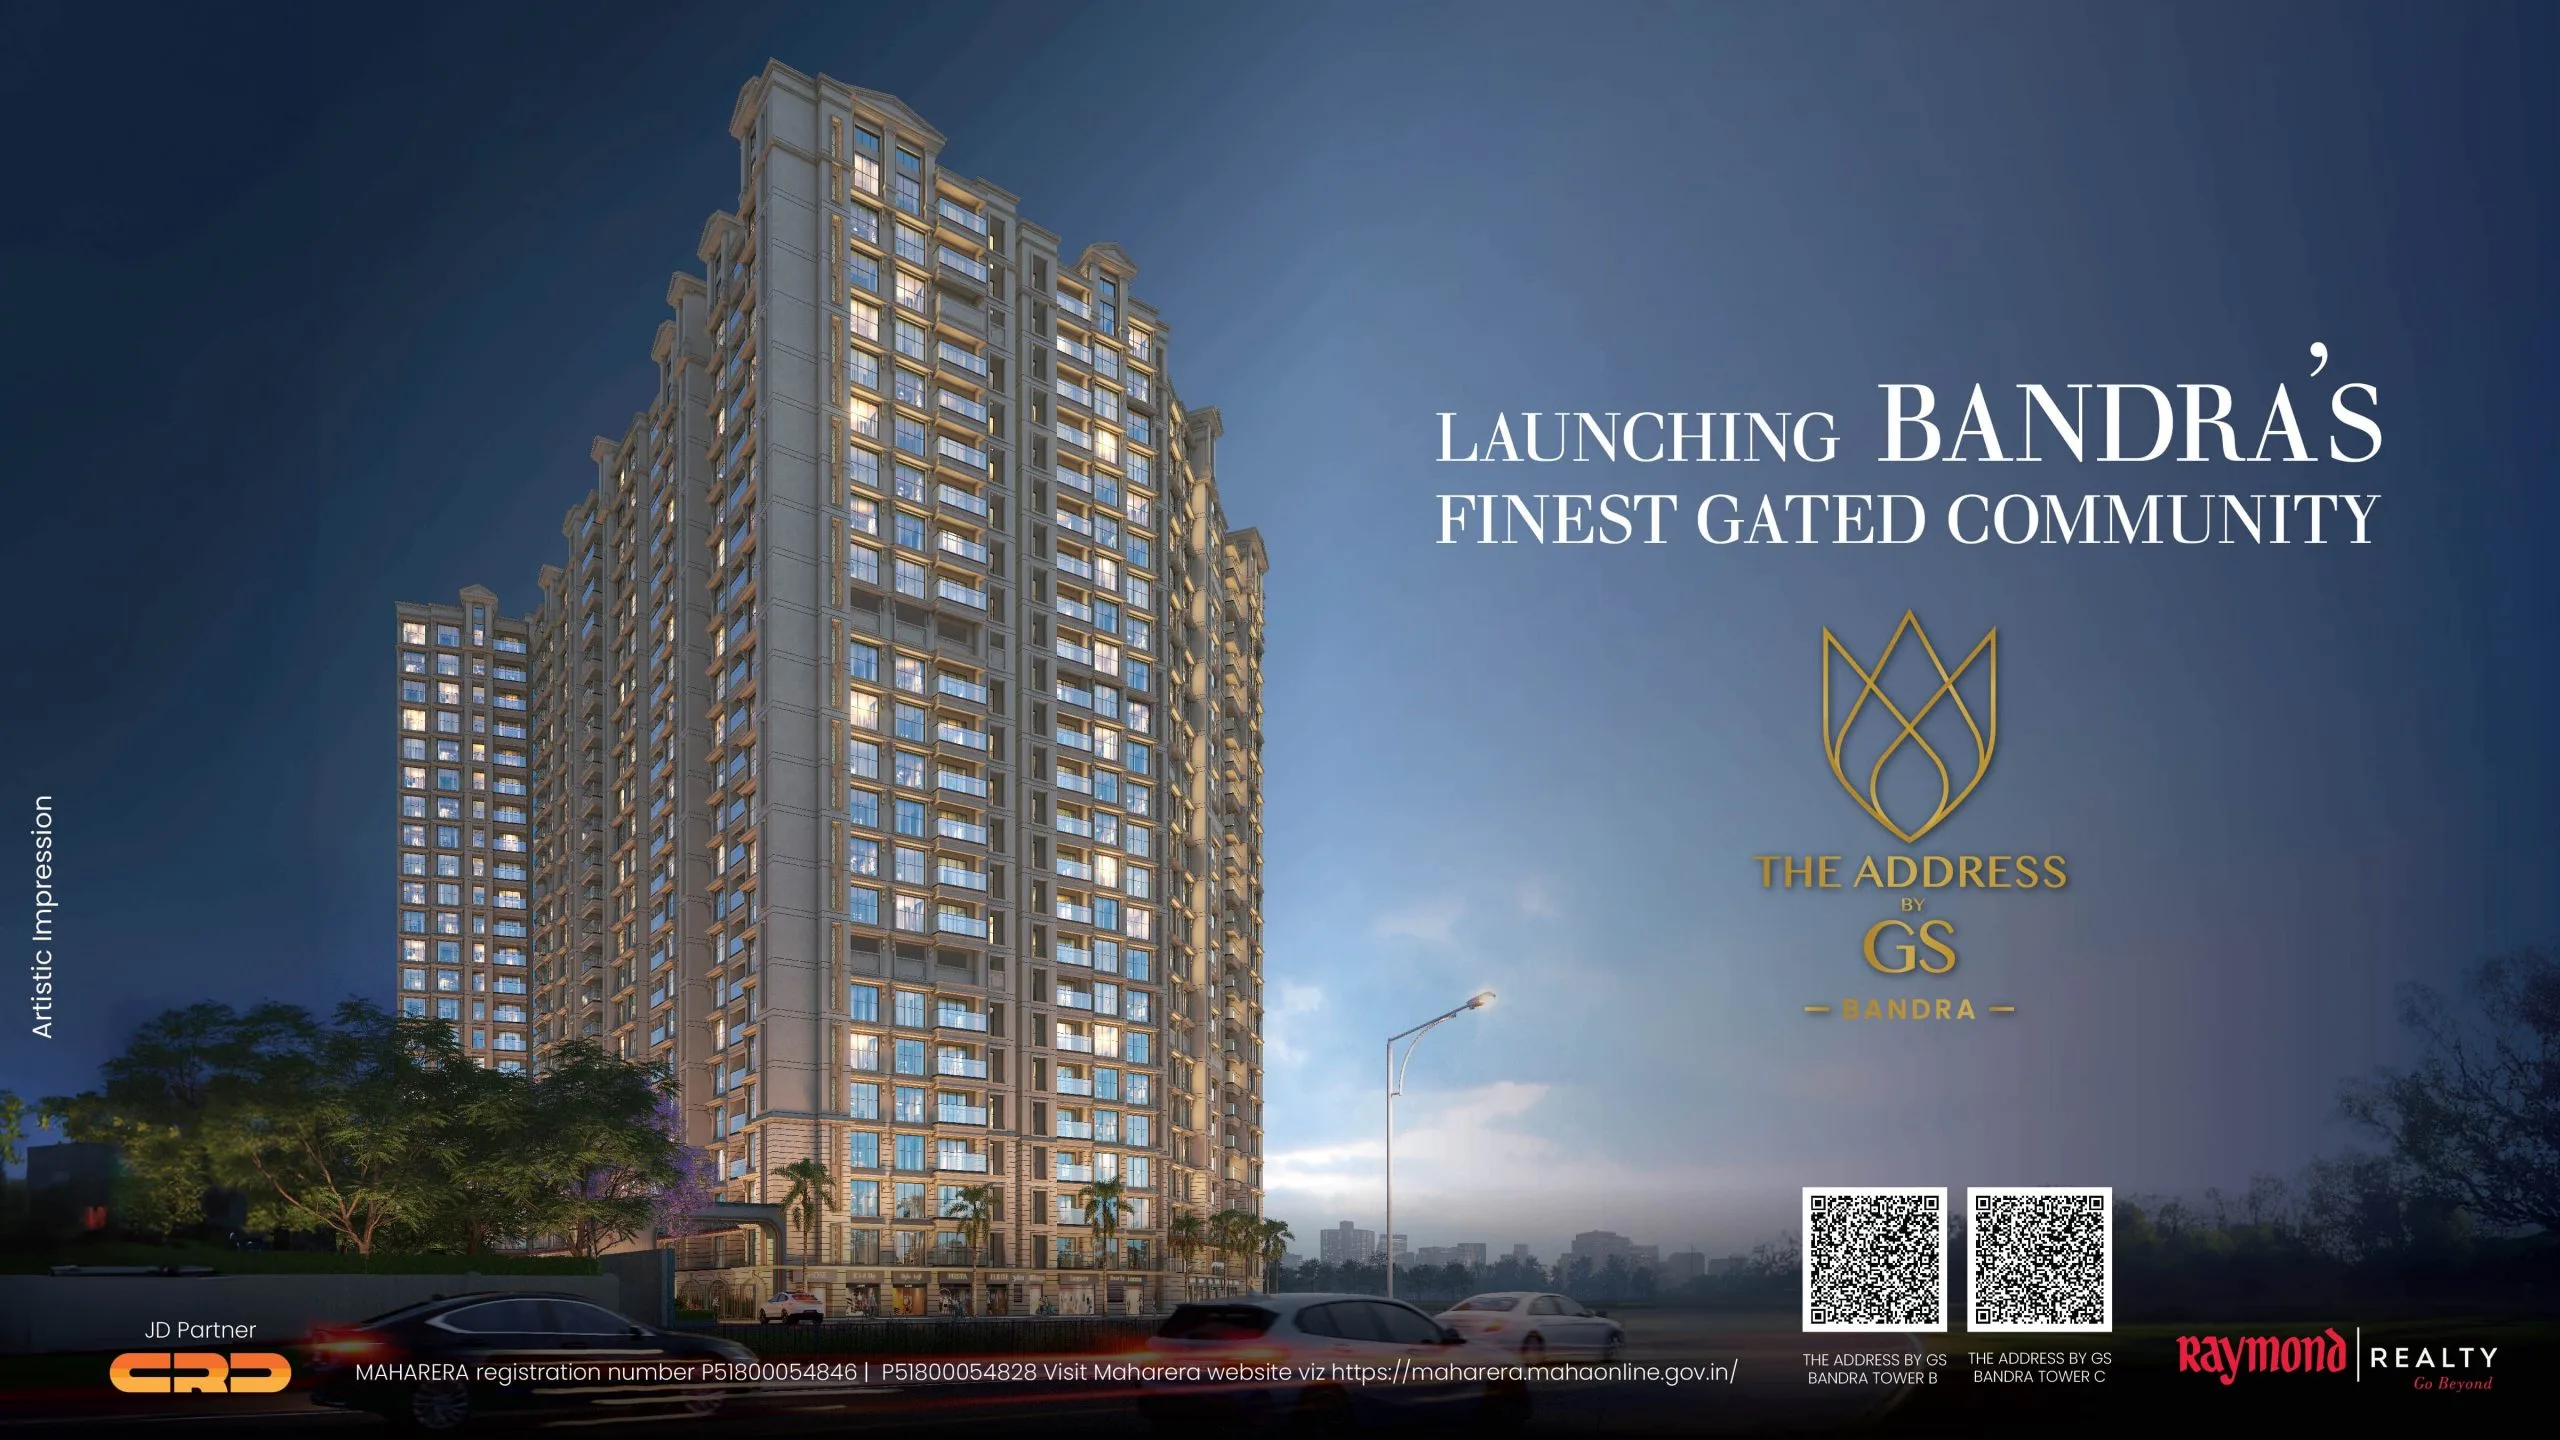 2 3 4 BHK in bandra east - Raymond Realty The Address By GS Bandra